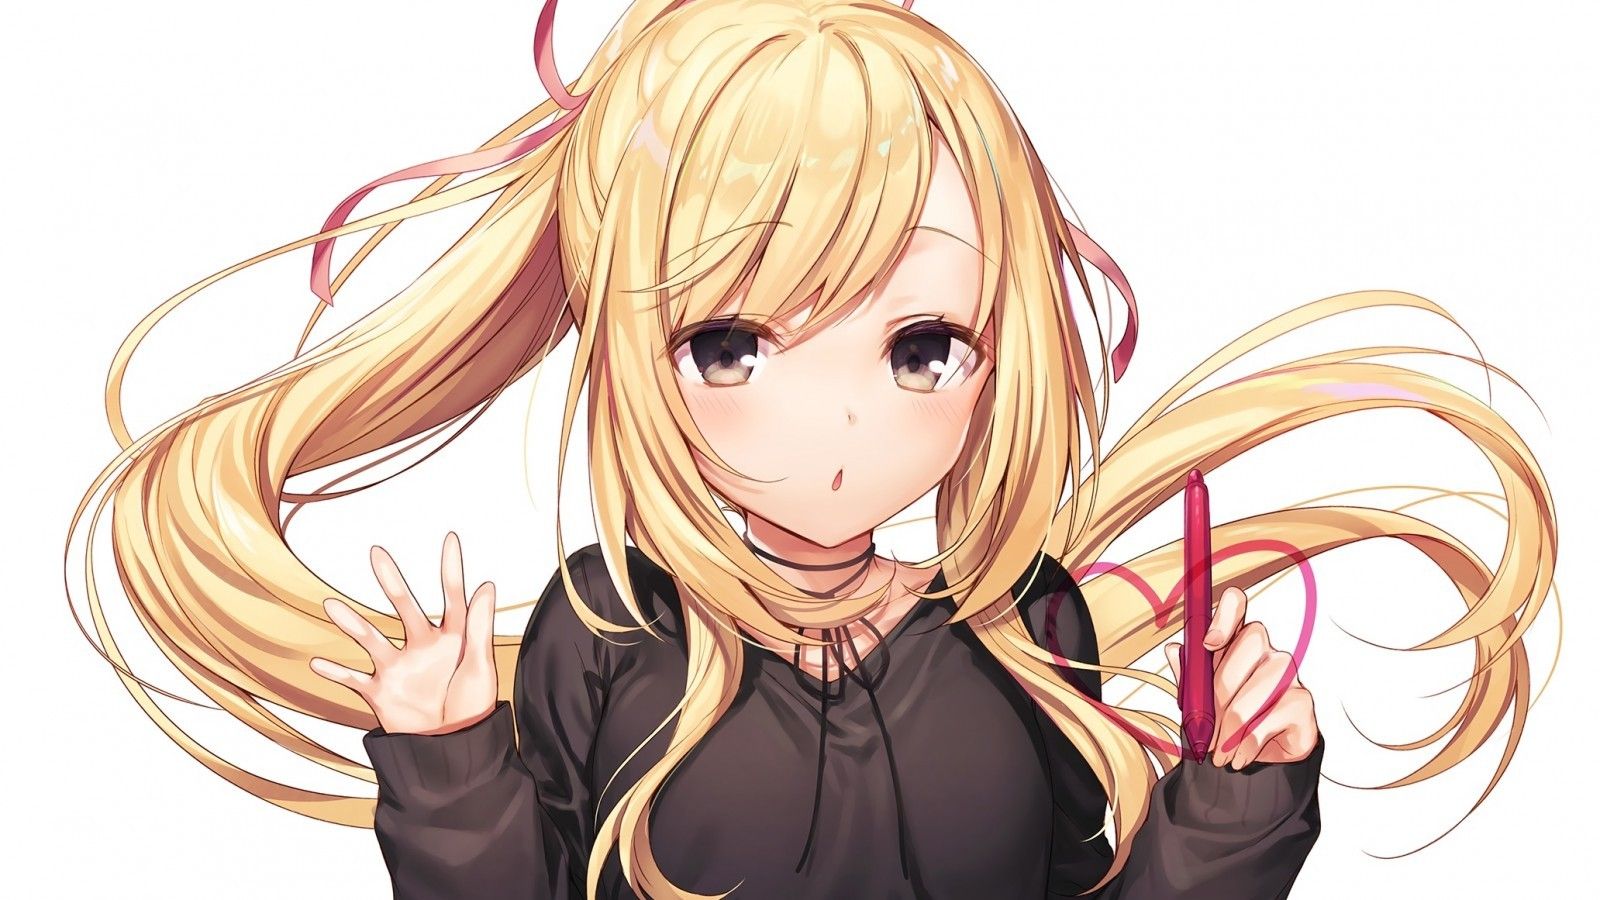 3. "The Best Products for Maintaining Bouncy Blonde Anime Hair" - wide 8